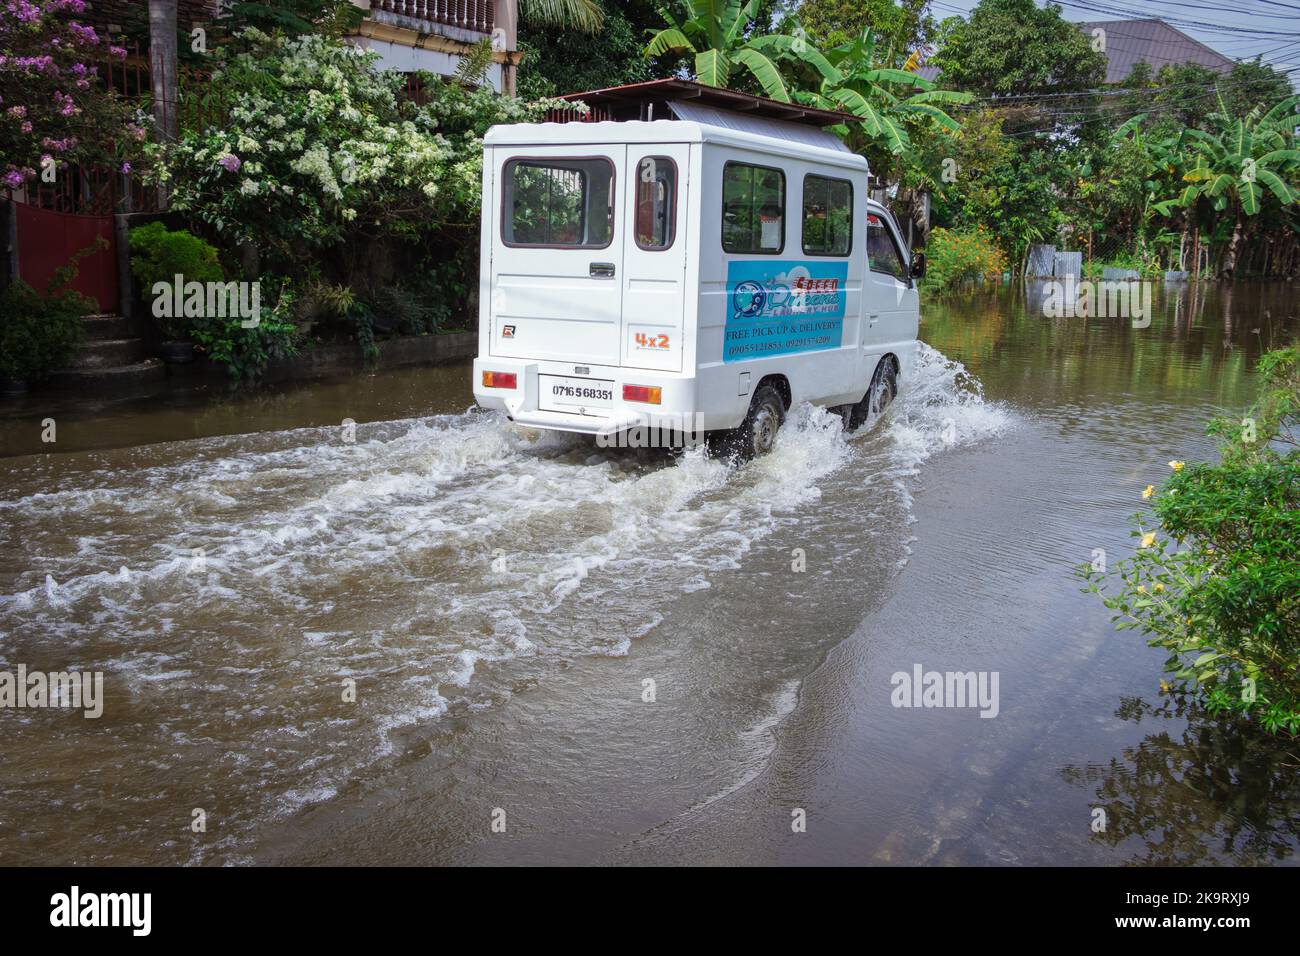 Severe tropical storm Paeng or Nalgae brought flashfloods and rain to the country. Van travelling on flooded road. Relief operation. Stock Photo